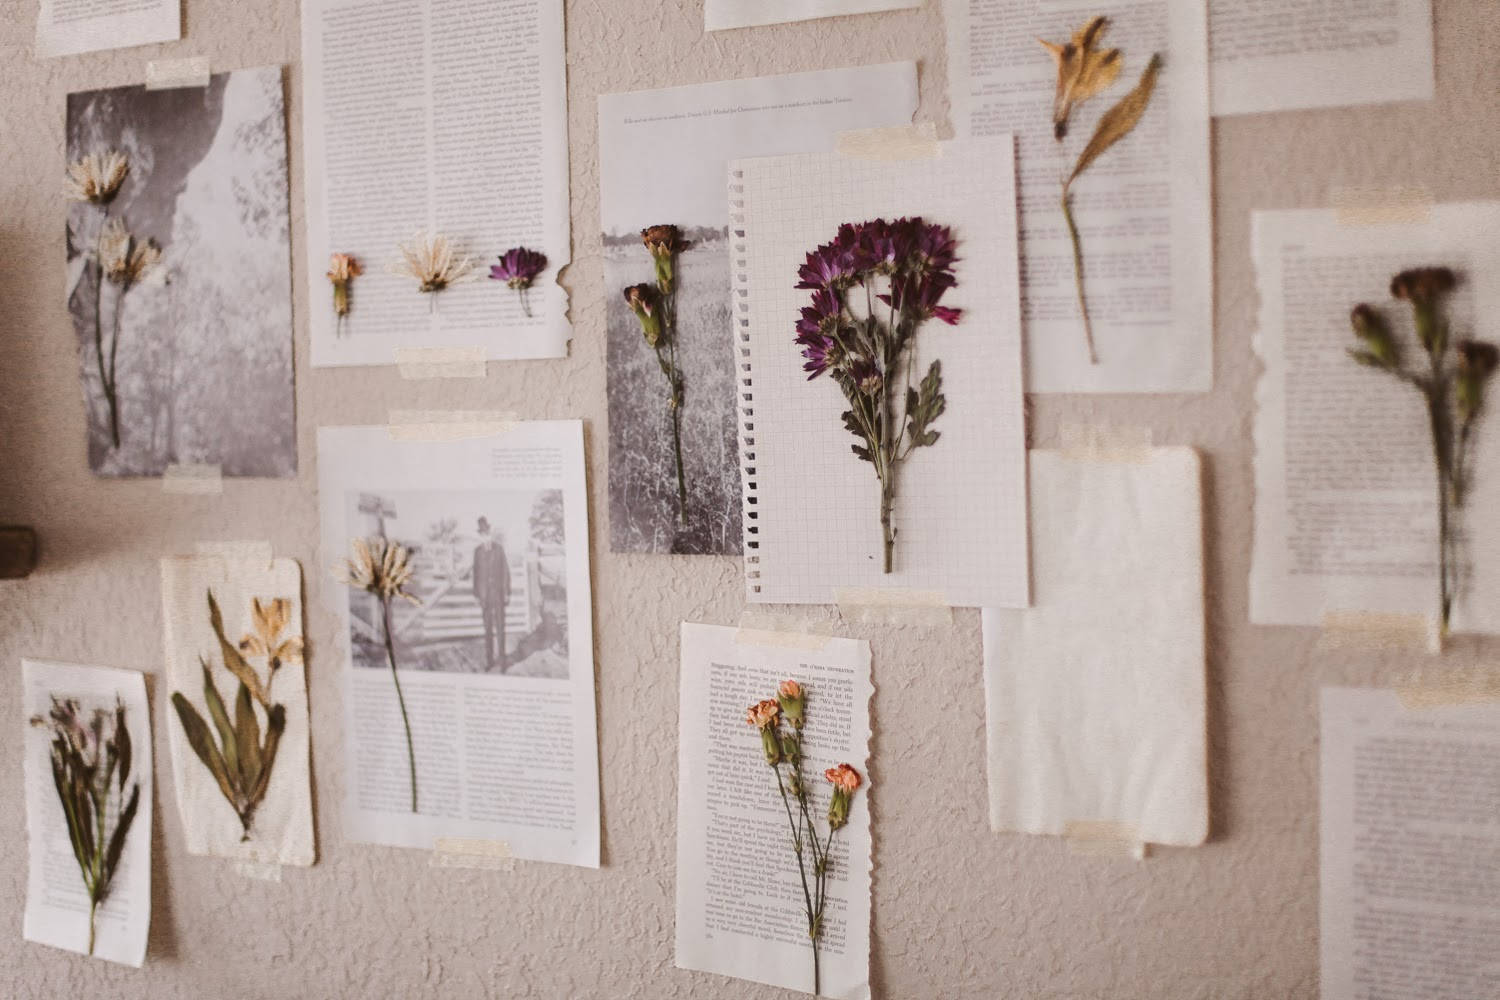 Pinterest-Inspired Laptop Workspace With Dried Flowers Decoration Wallpaper